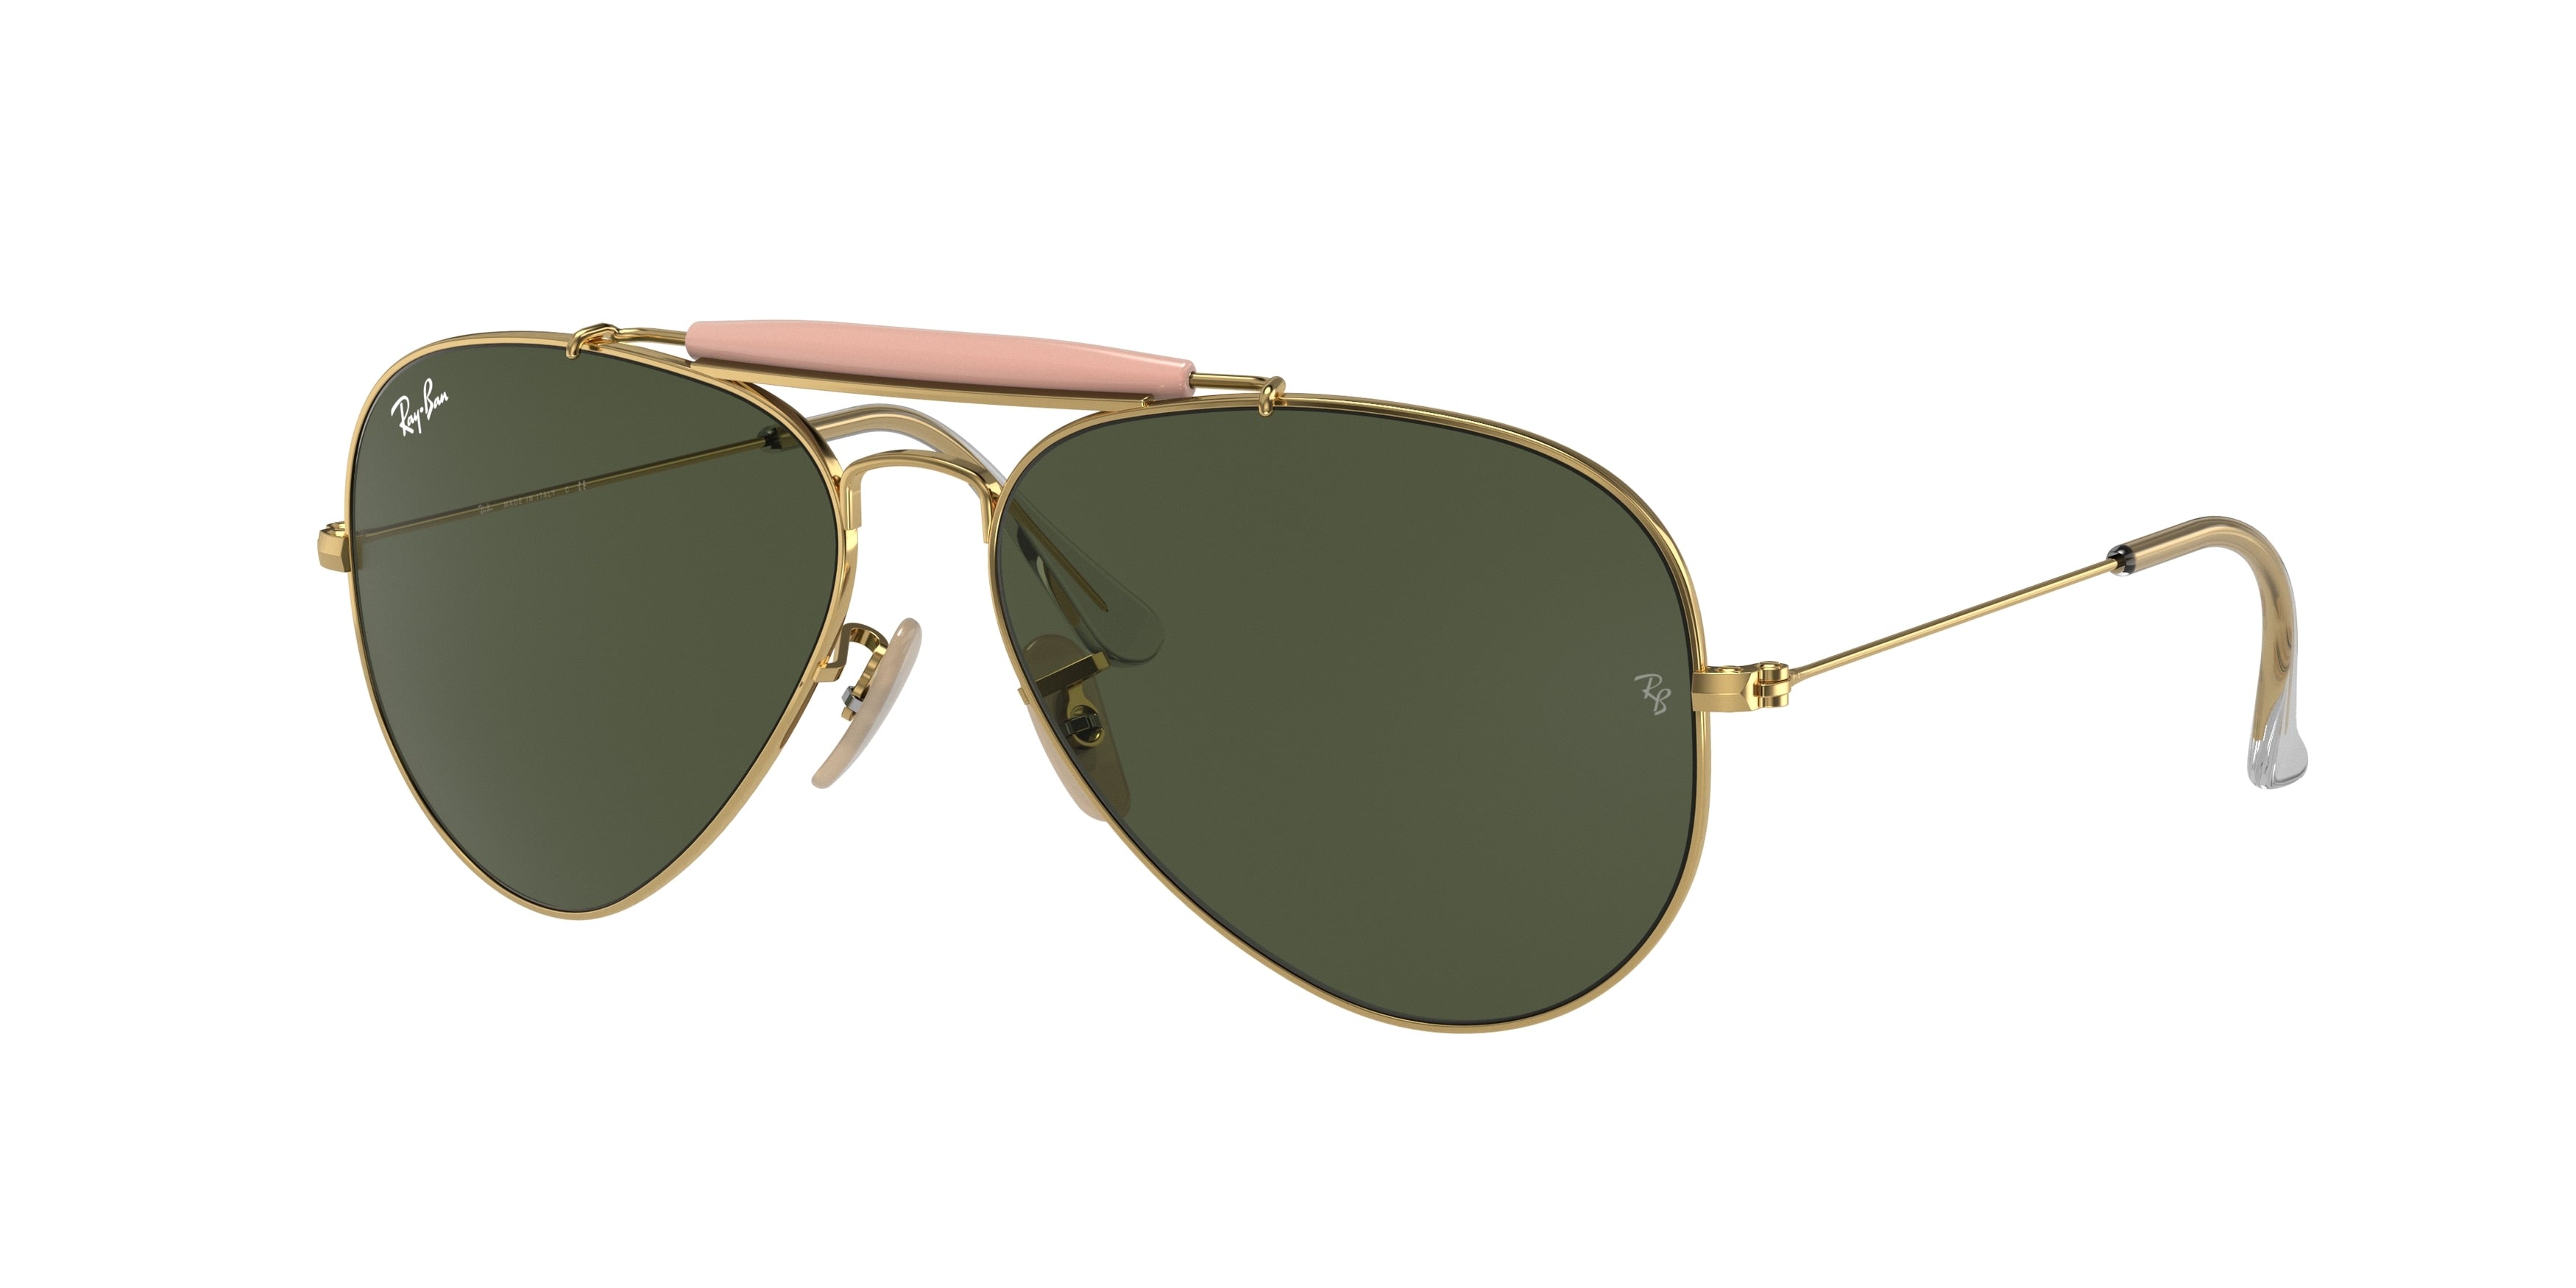 Ray-Ban OUTDOORSMAN II RB3029 Pilot Sunglasses  L2112-Gold 61-140-14 - Color Map Gold